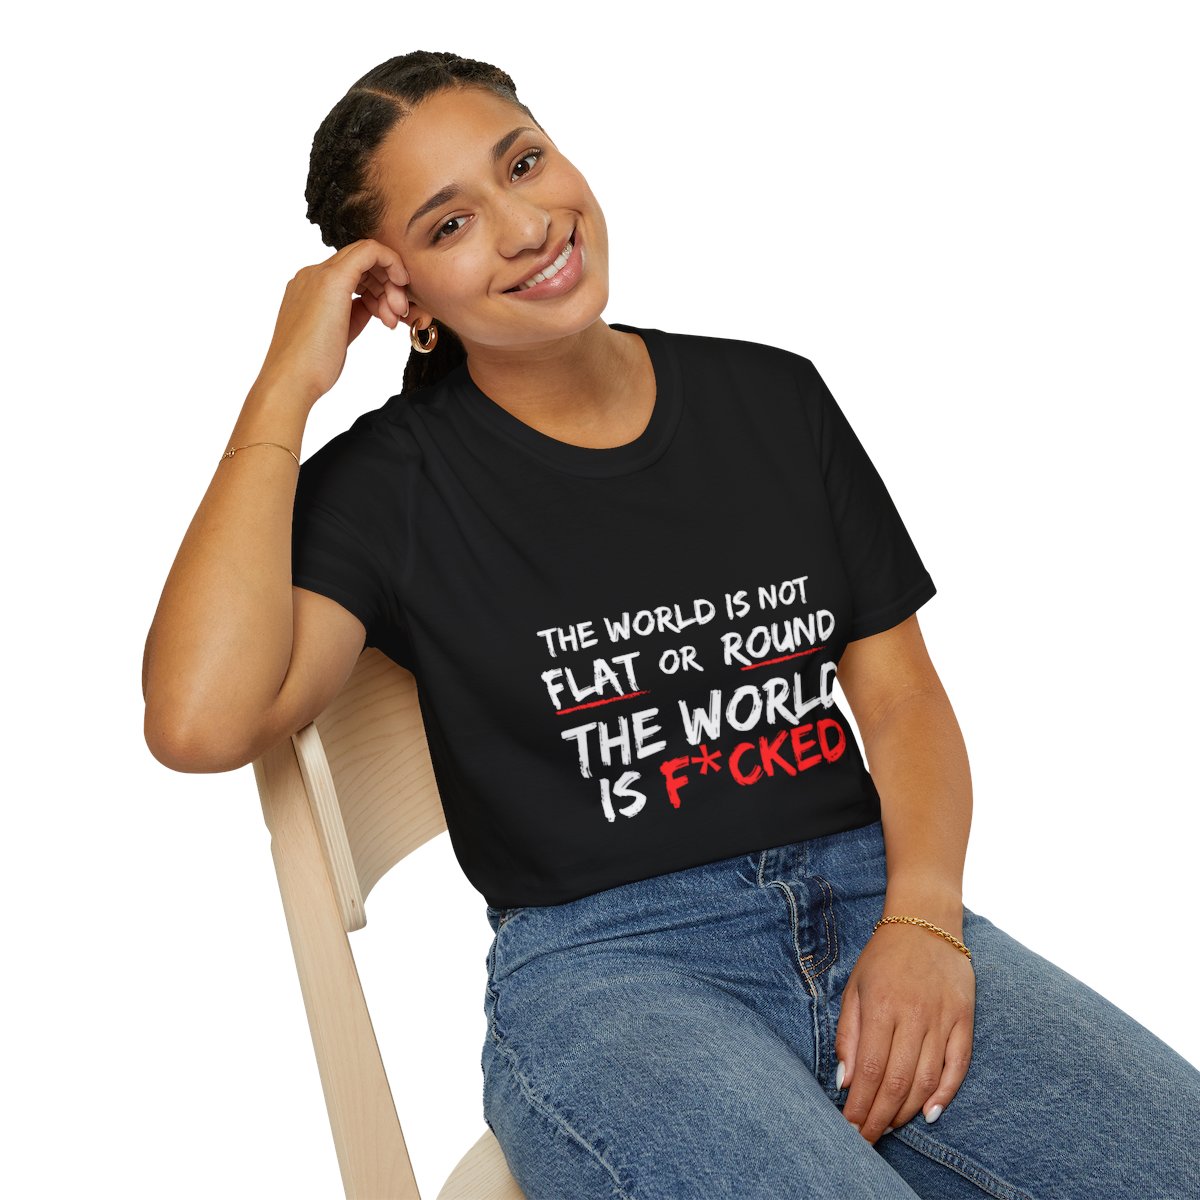 The World Is Not Flat Or Round, The World Is F*cked - Unisex Softstyle T-Shirt product thumbnail image